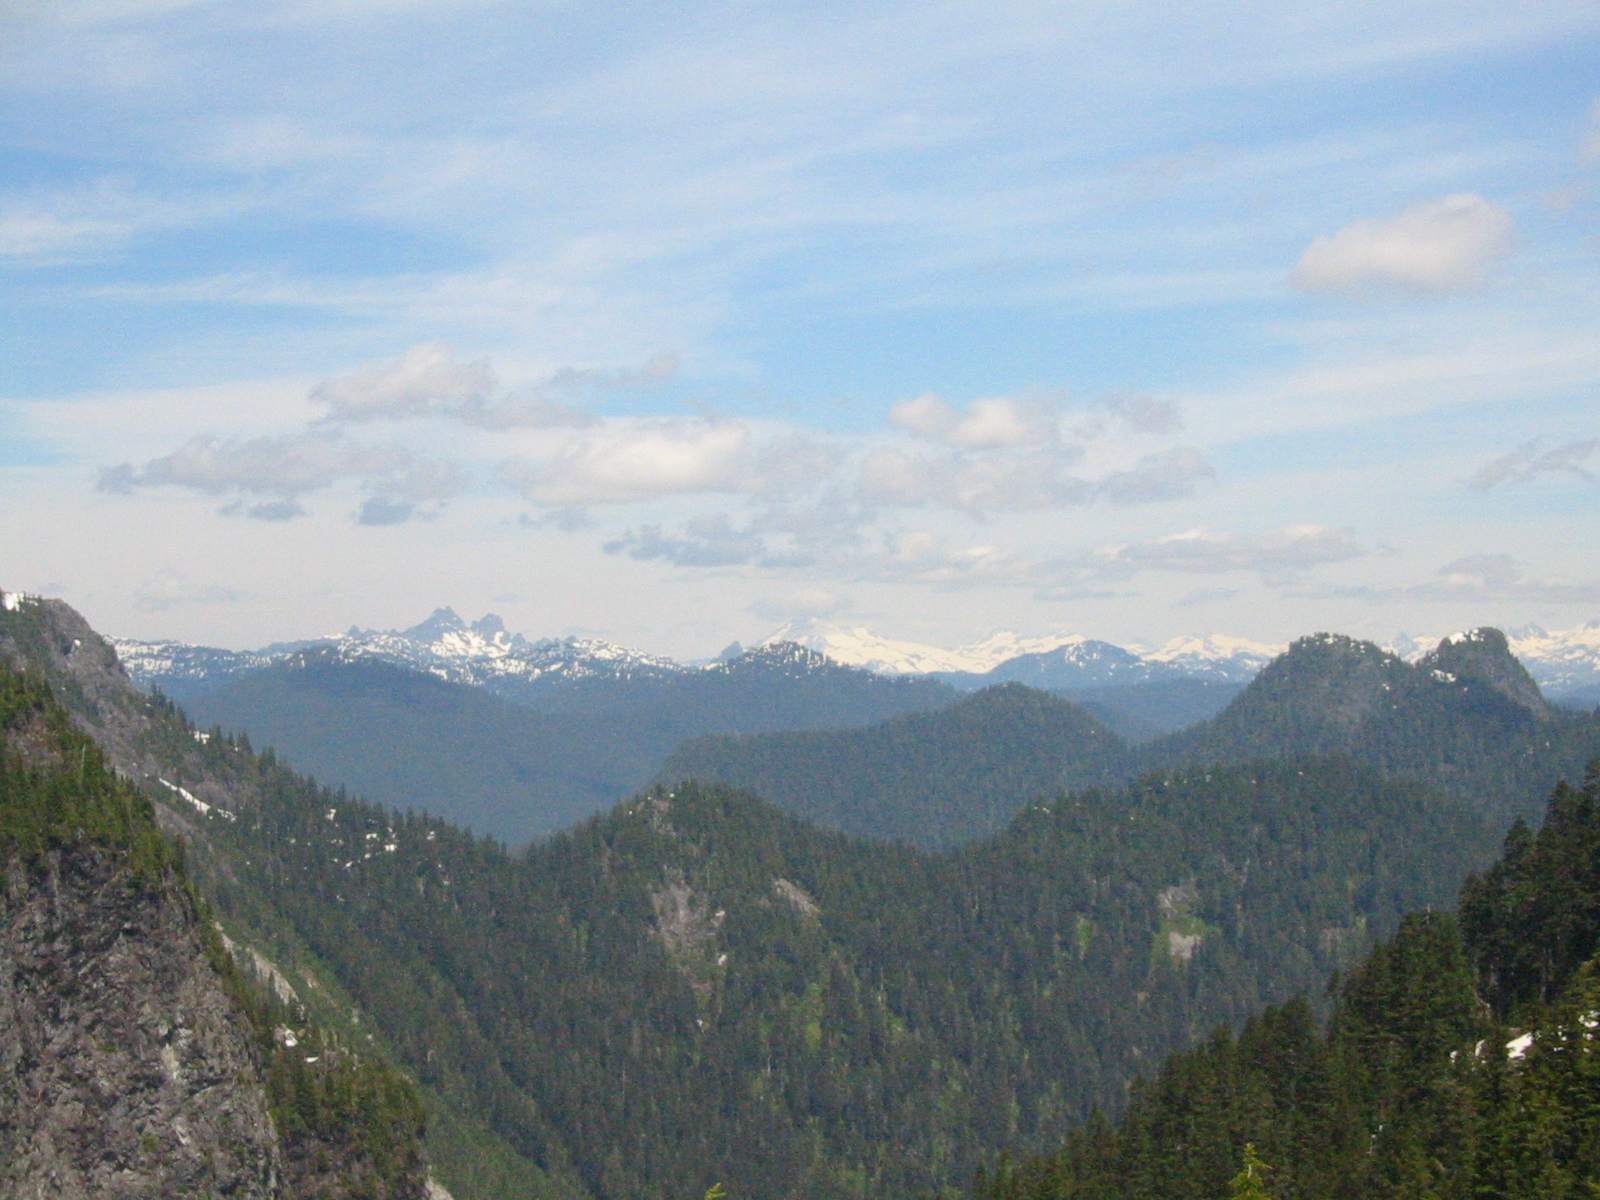 the mountains are surrounded by evergreens and snow - capped peaks